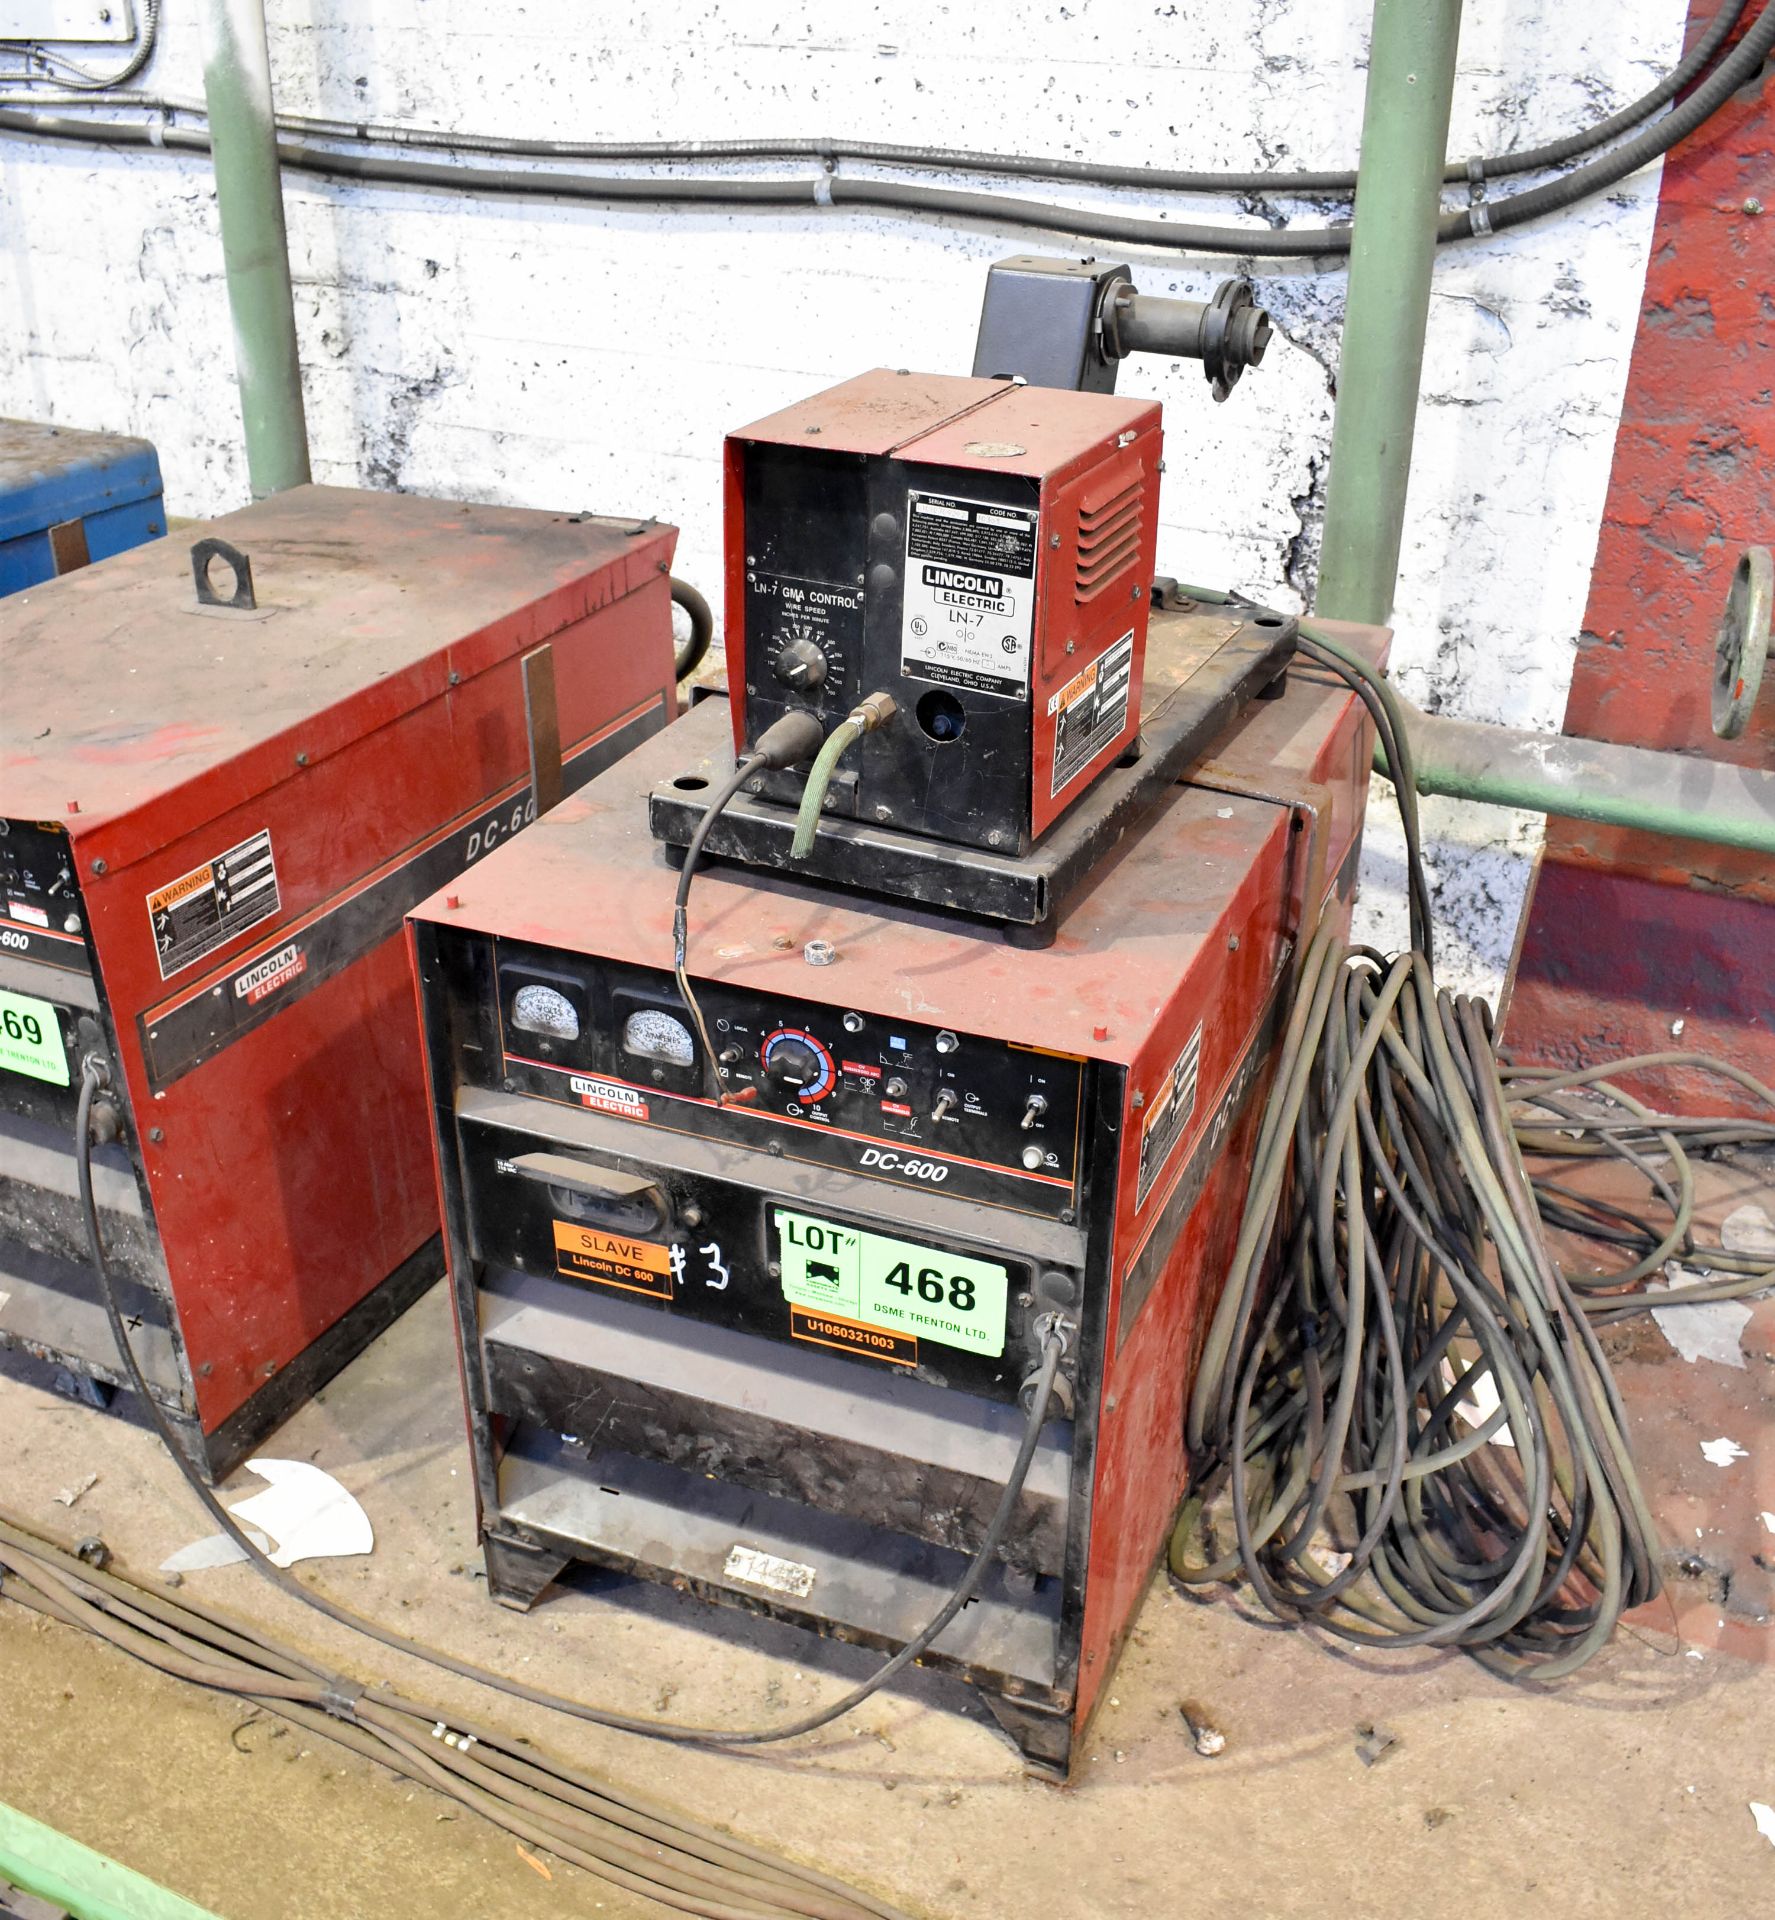 LINCOLN ELECTRIC IDEAL DC600 MIG WELDER WITH WIRE FEEDER (CI) [RIGGING FEE FOR LOT# 468 - $40 USD +